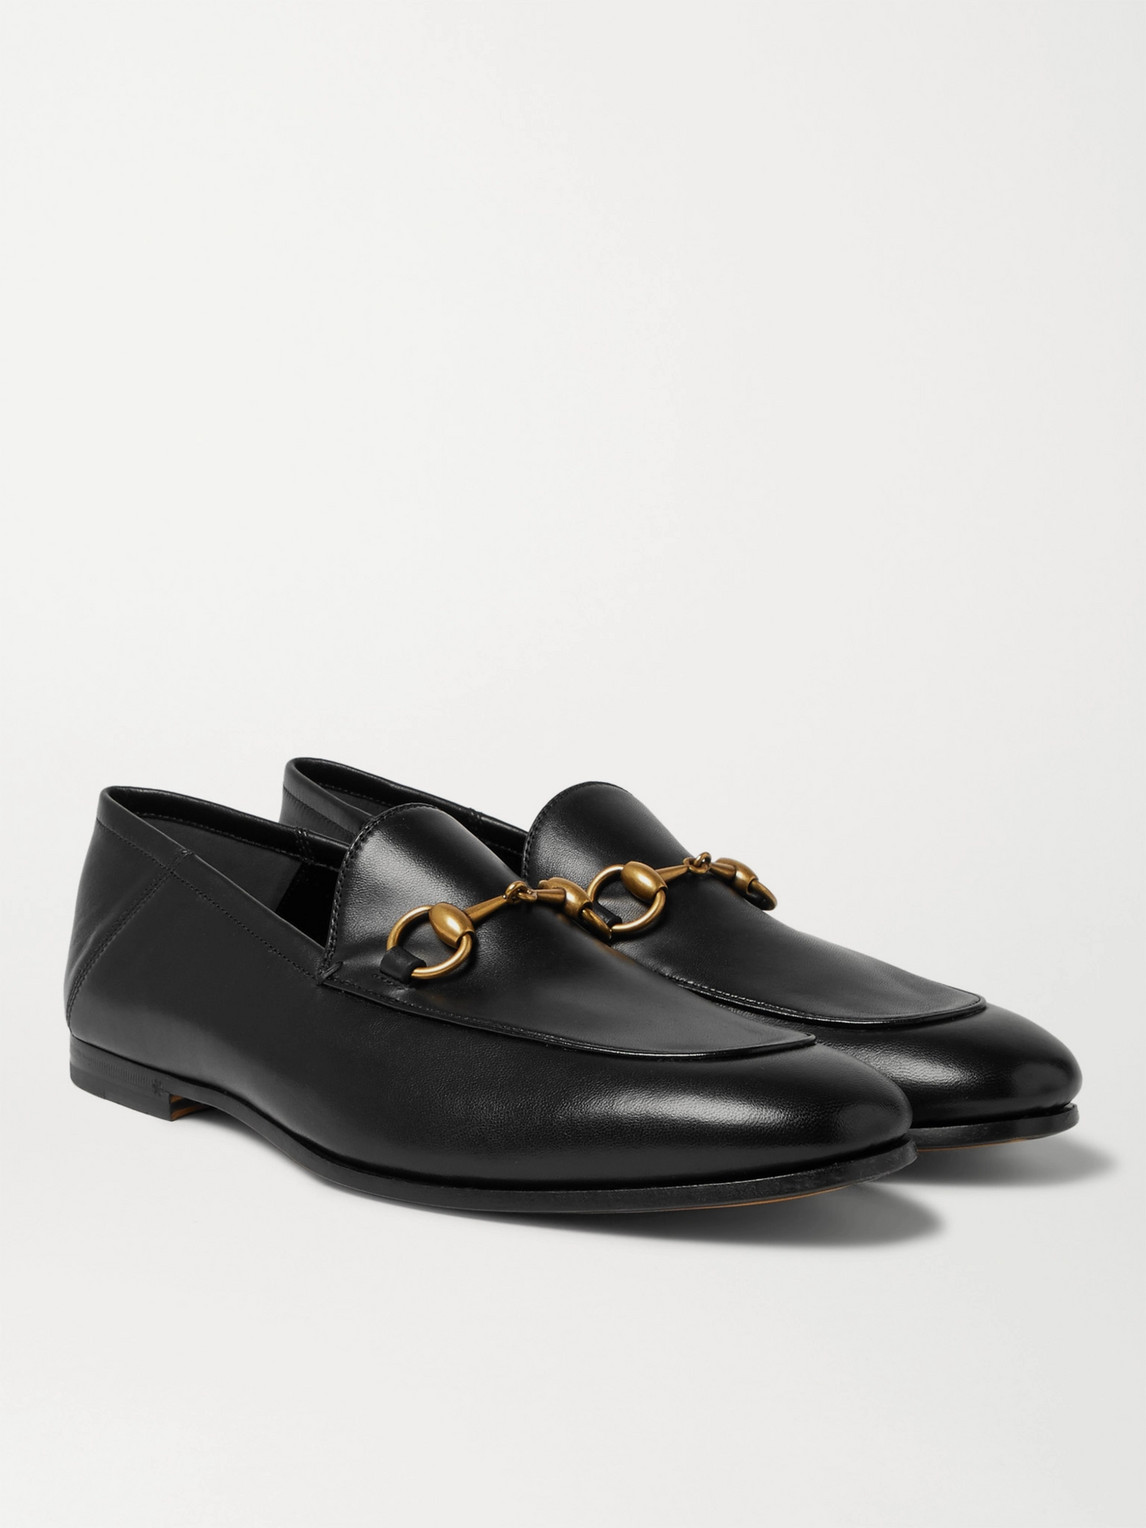 GUCCI BRIXTON HORSEBIT COLLAPSIBLE-HEEL LEATHER LOAFERS